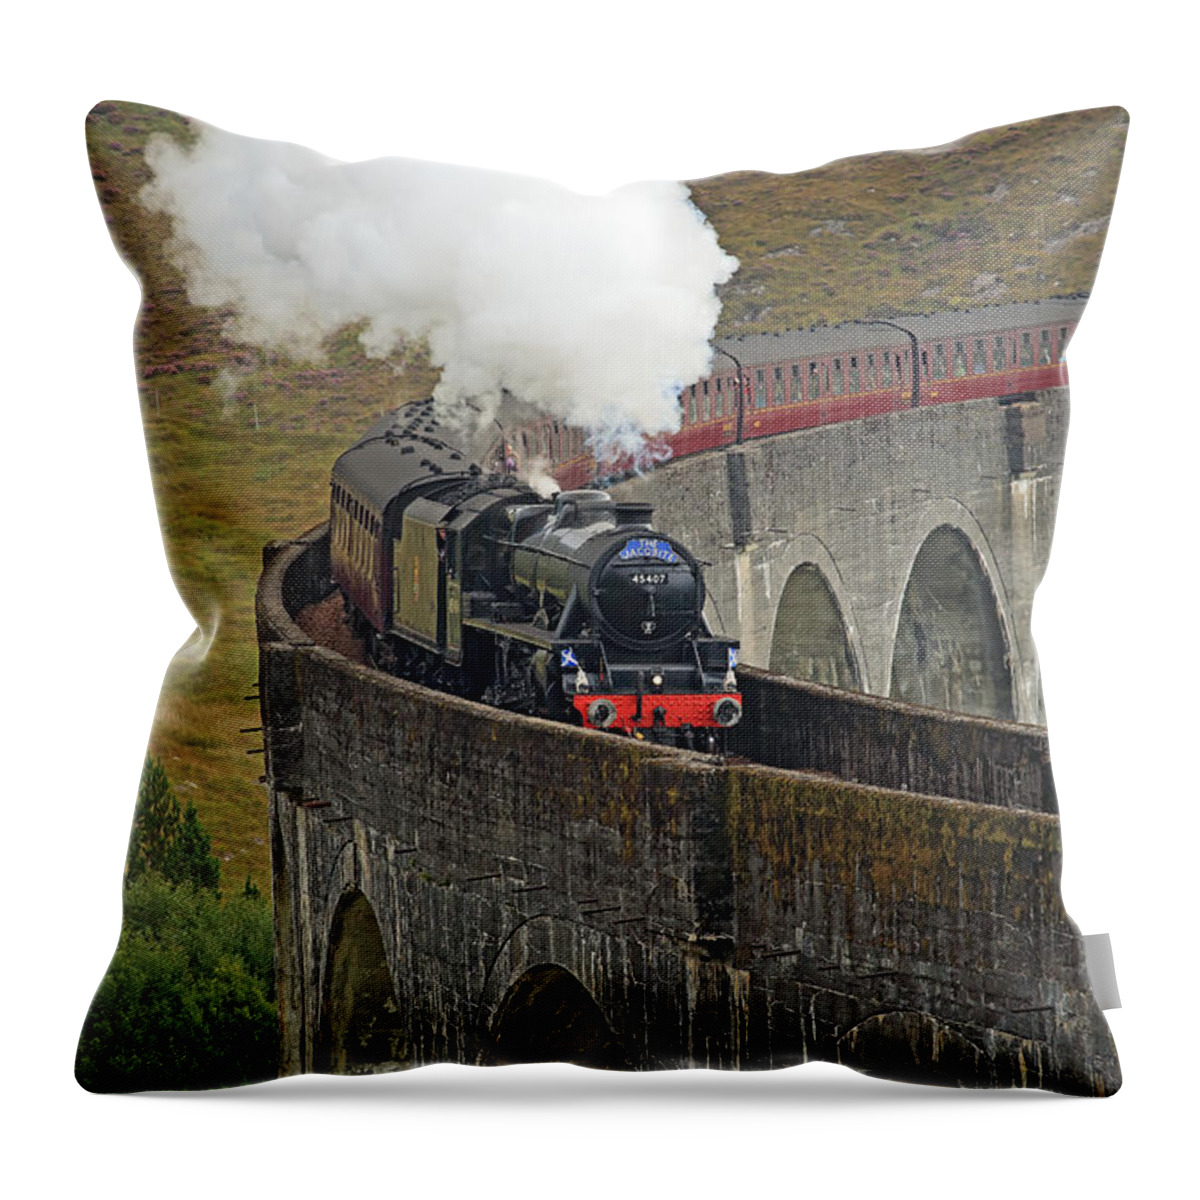 Jacobite Throw Pillow featuring the photograph The Jacobite Steam Train #1 by Maria Gaellman